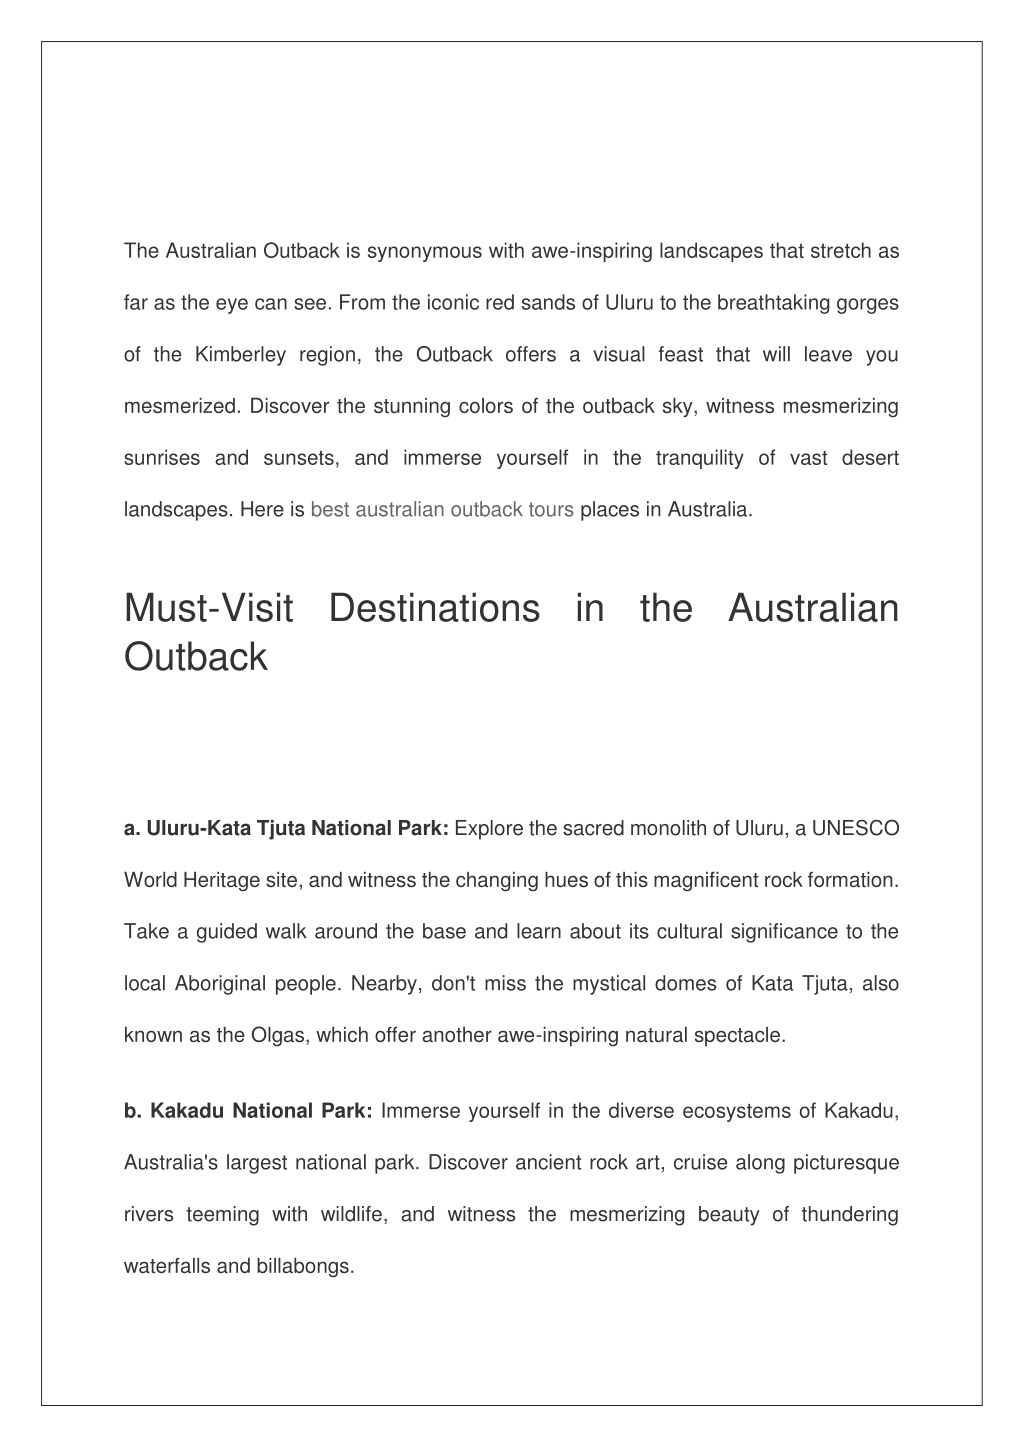 PPT - Discover the Unforgettable Australian Outback Tours An ...